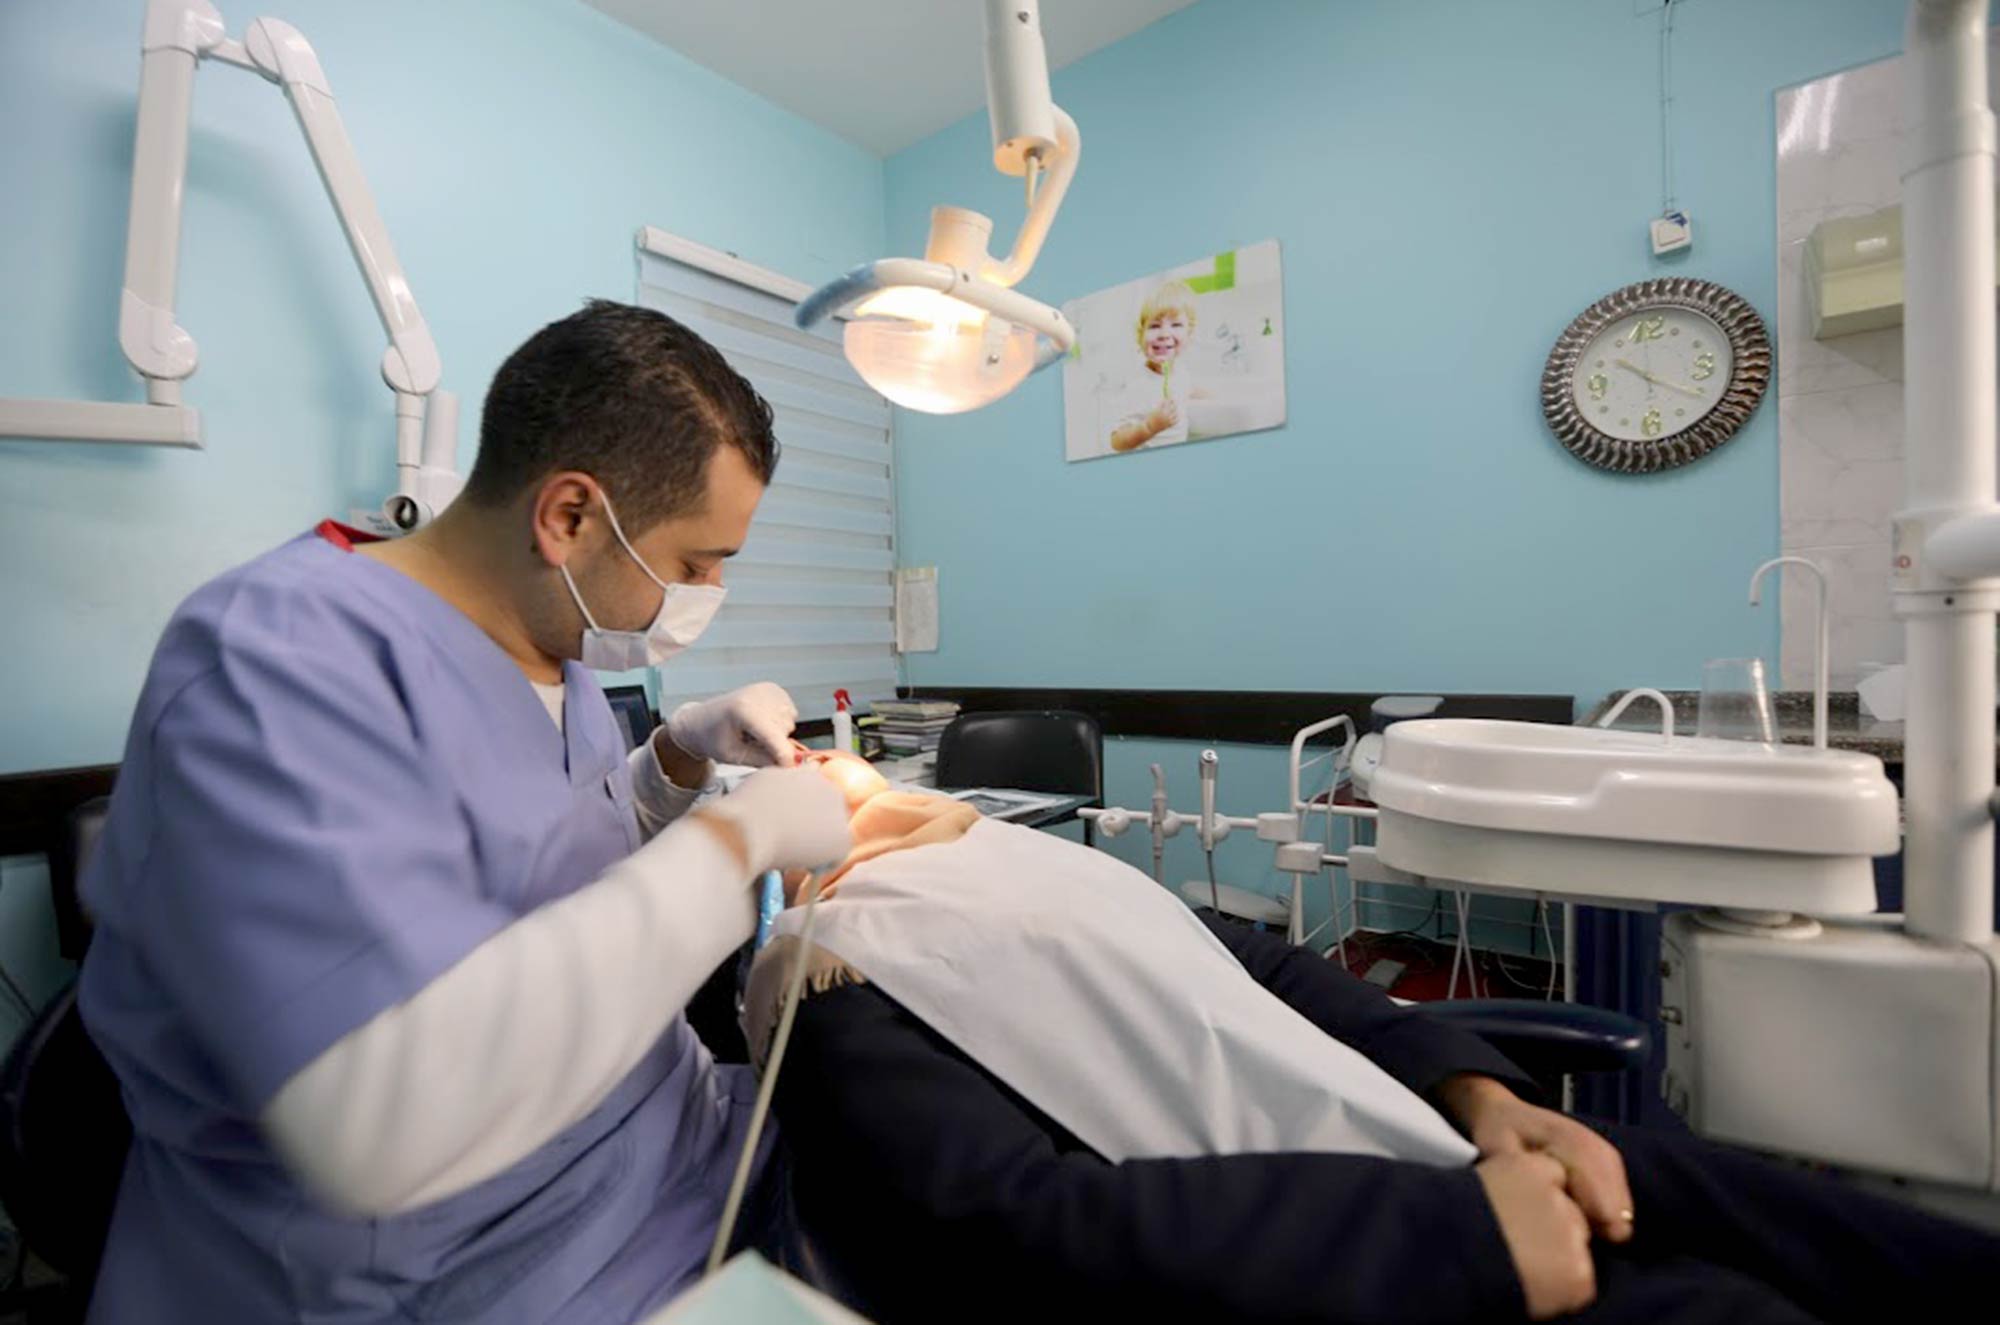 Dr. Shaban Jouda with a patient in the dentist's office